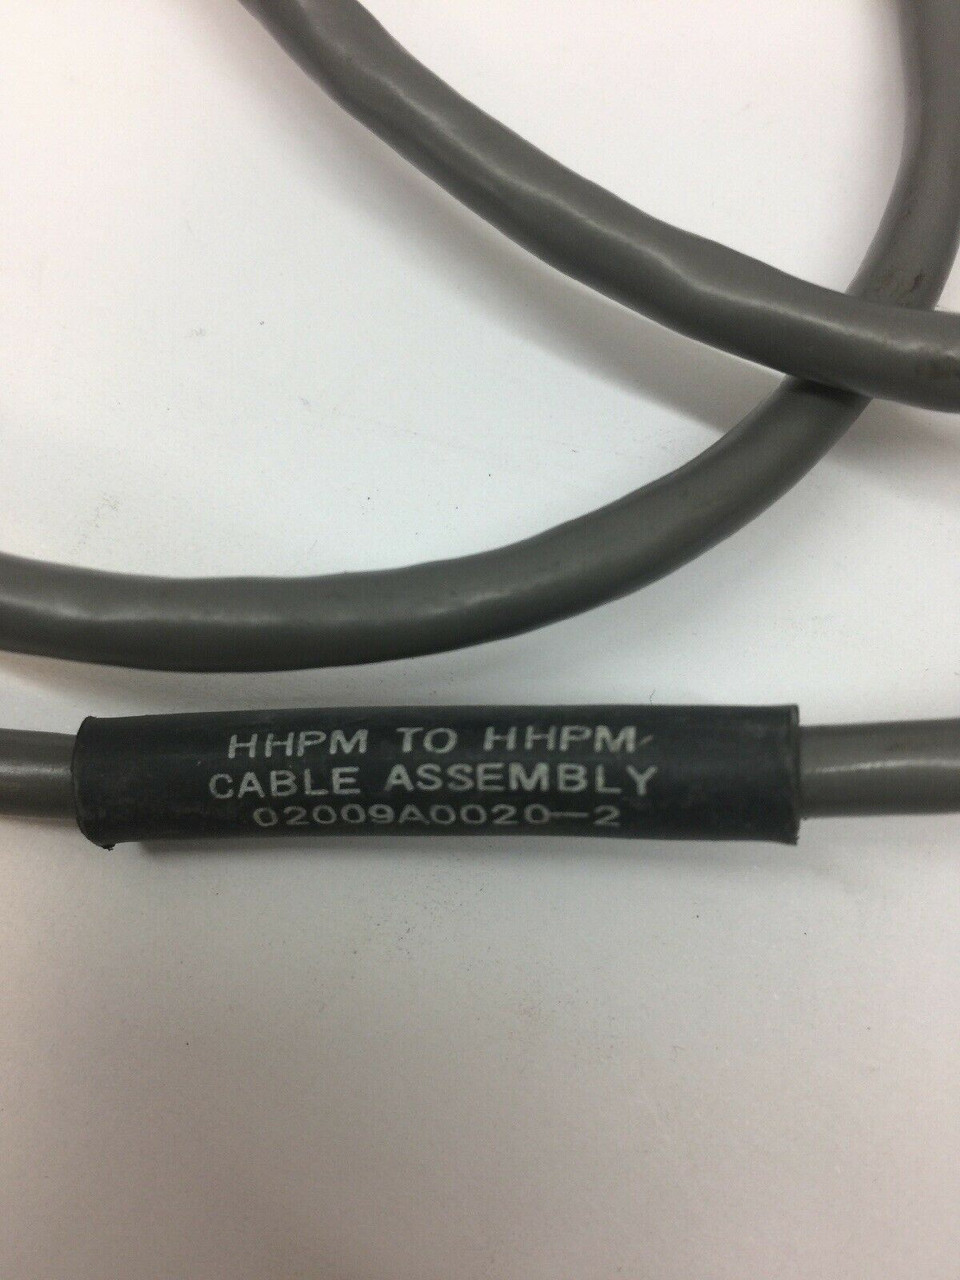 HHPM to HHPM Computer Cable Assembly 02009A0020-2 Belden